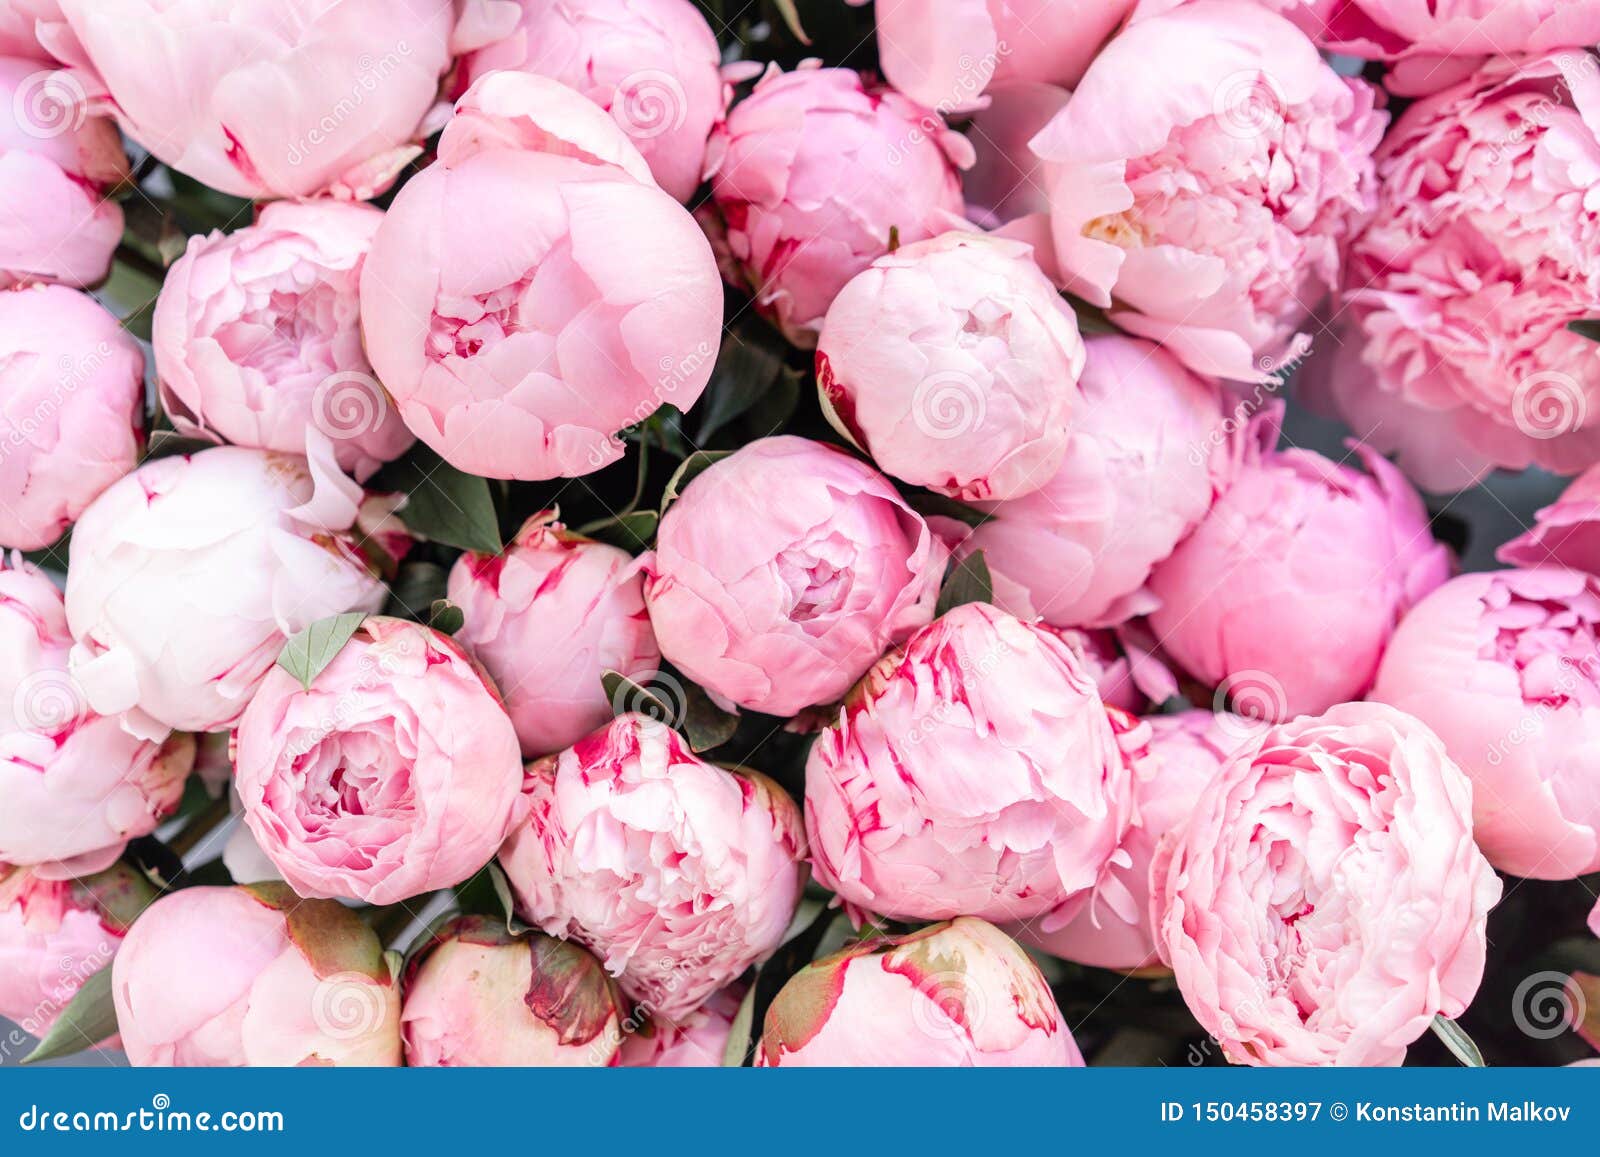 Floral Carpet or Wallpaper. Background of Pink Peonies. Morning Light in  the Room Stock Image - Image of bouquet, flower: 150458397